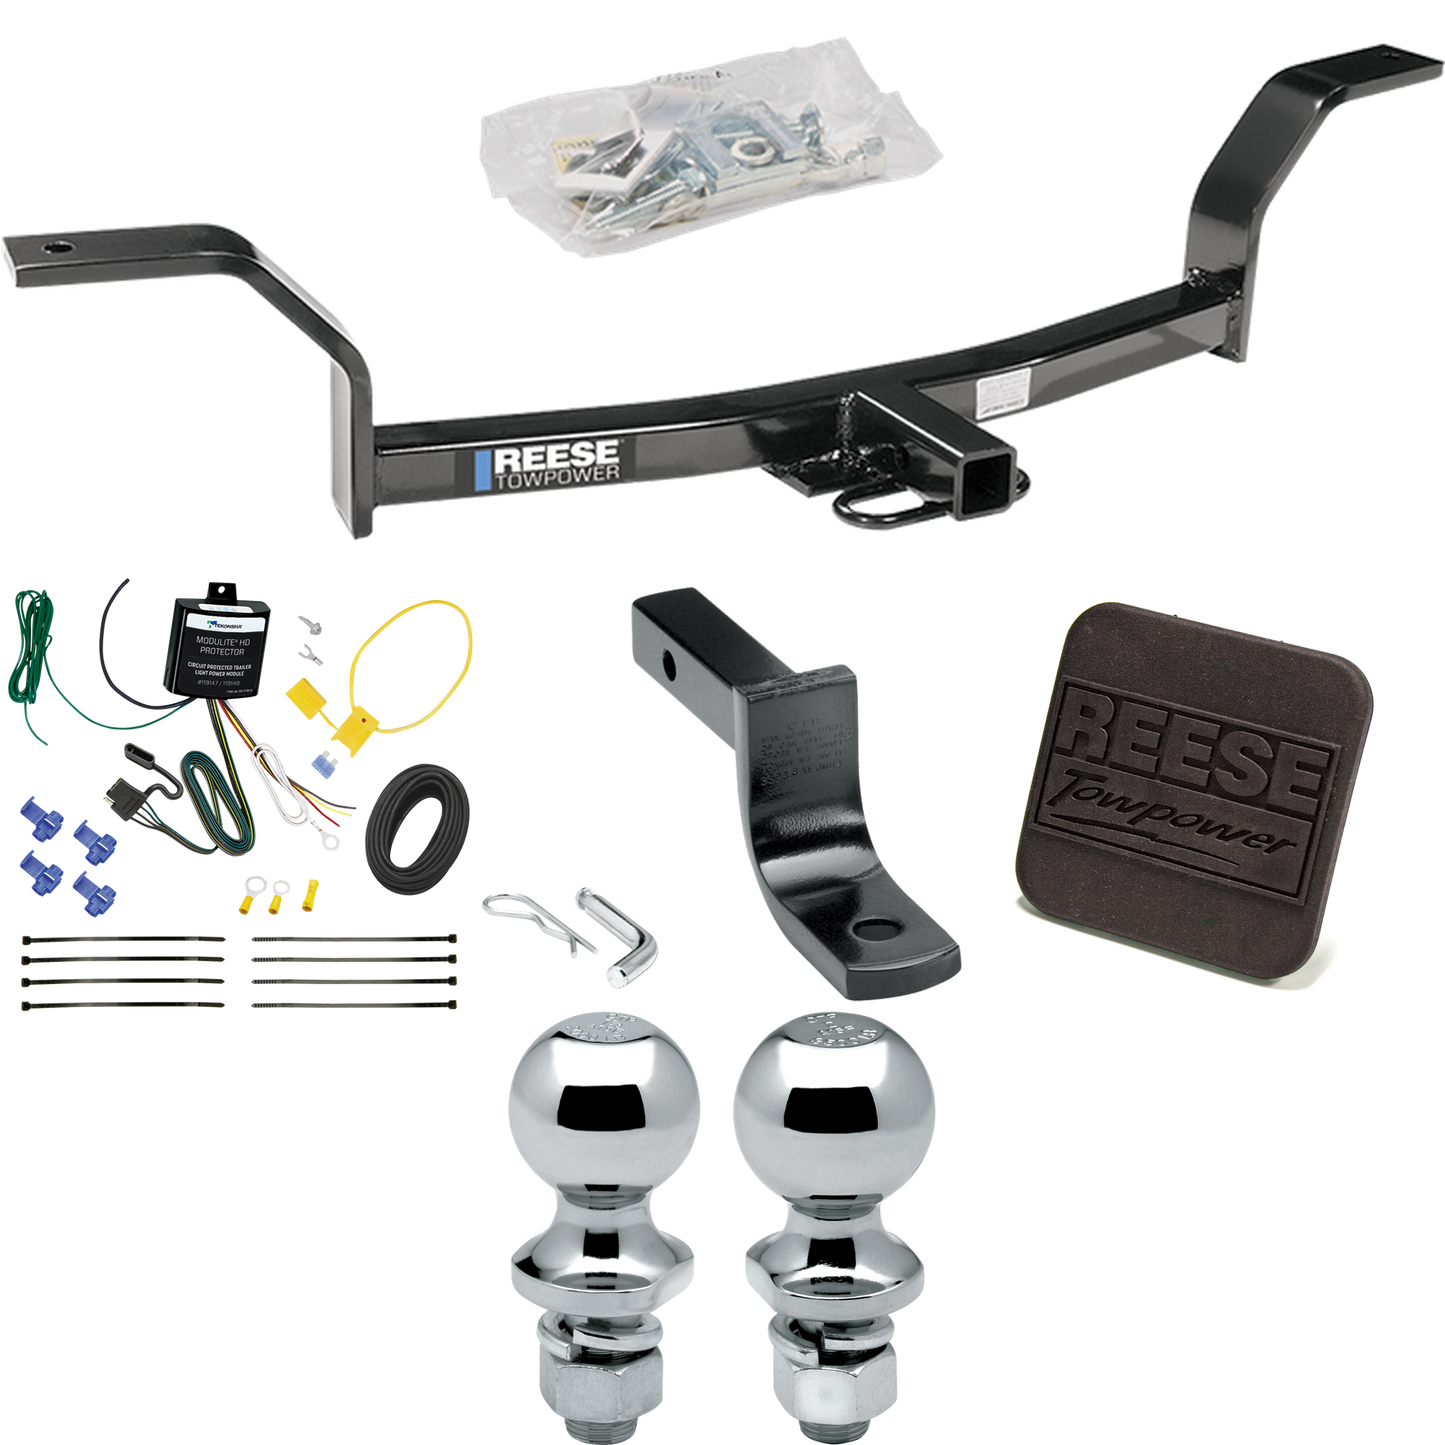 Fits 1992-2000 Honda Civic Trailer Hitch Tow PKG w/ 4-Flat Wiring Harness + Draw-Bar + 1-7/8" + 2" Ball + Hitch Cover By Reese Towpower